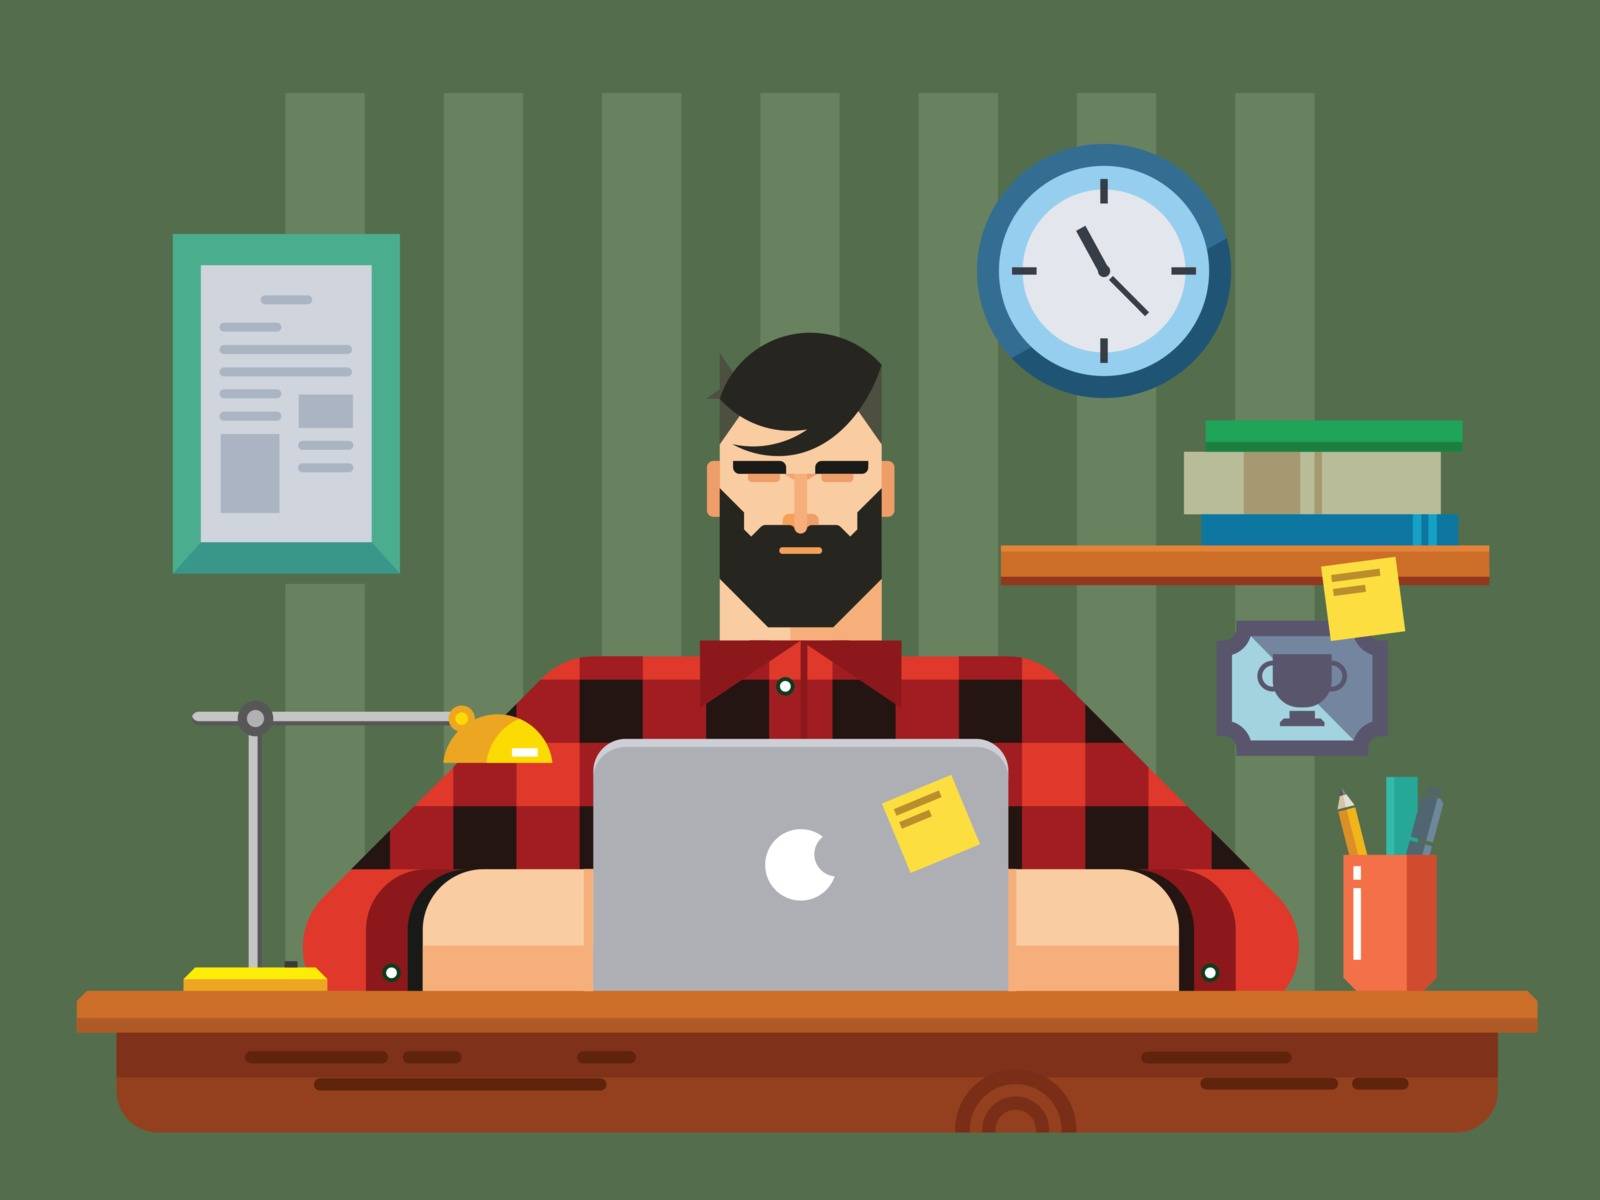 Man at a Desk in Front of Laptop flat design style